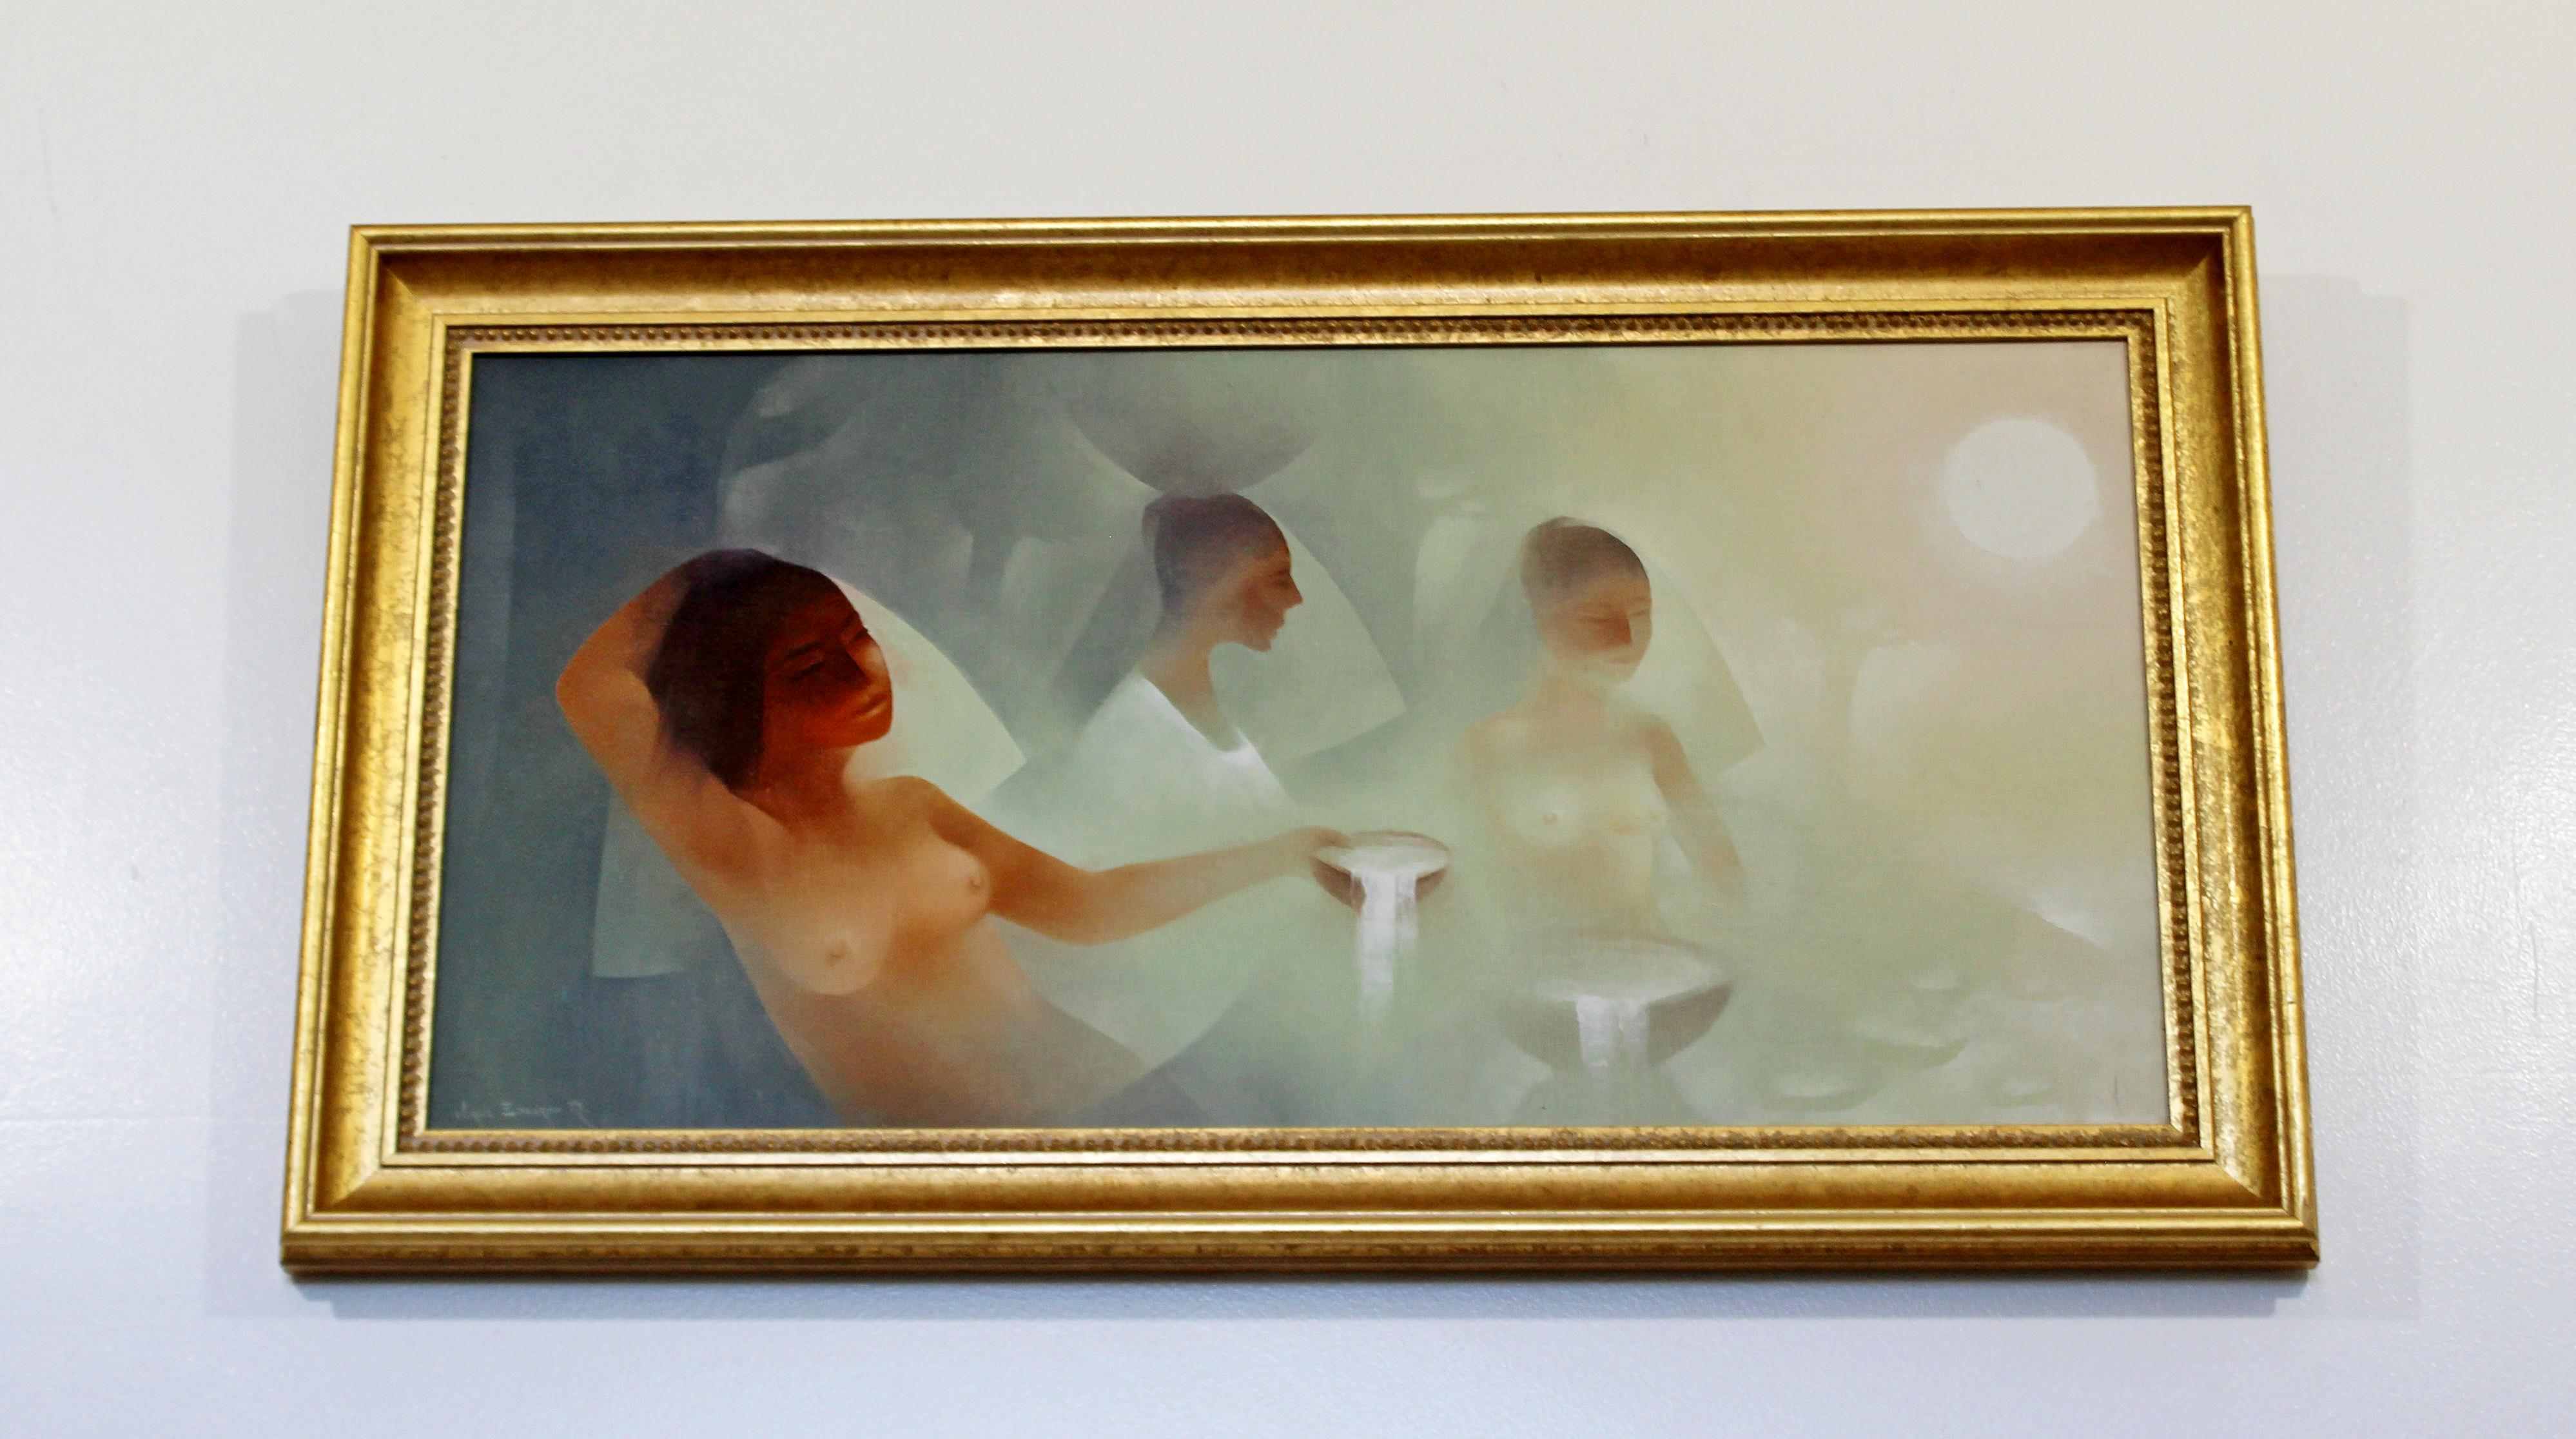 For your consideration is a phenomenal oil on canvas framed painting of nude women holding bowls, signed by Jorge Edgardo. In excellent condition. The dimensions of the frame are 36